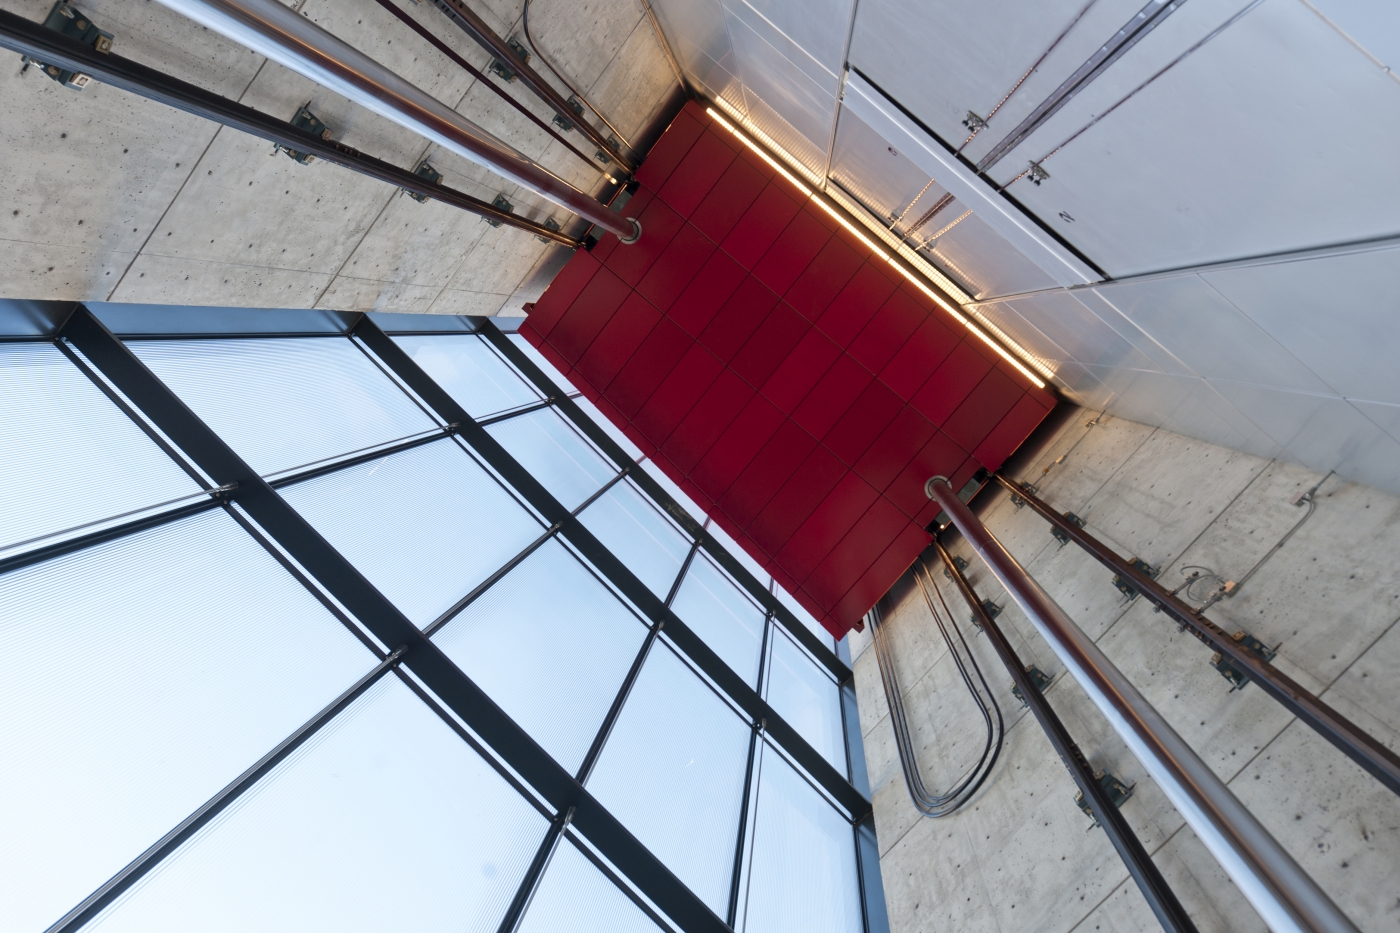 looking up at the gallery's moving room elevator covered in bright red panels from below